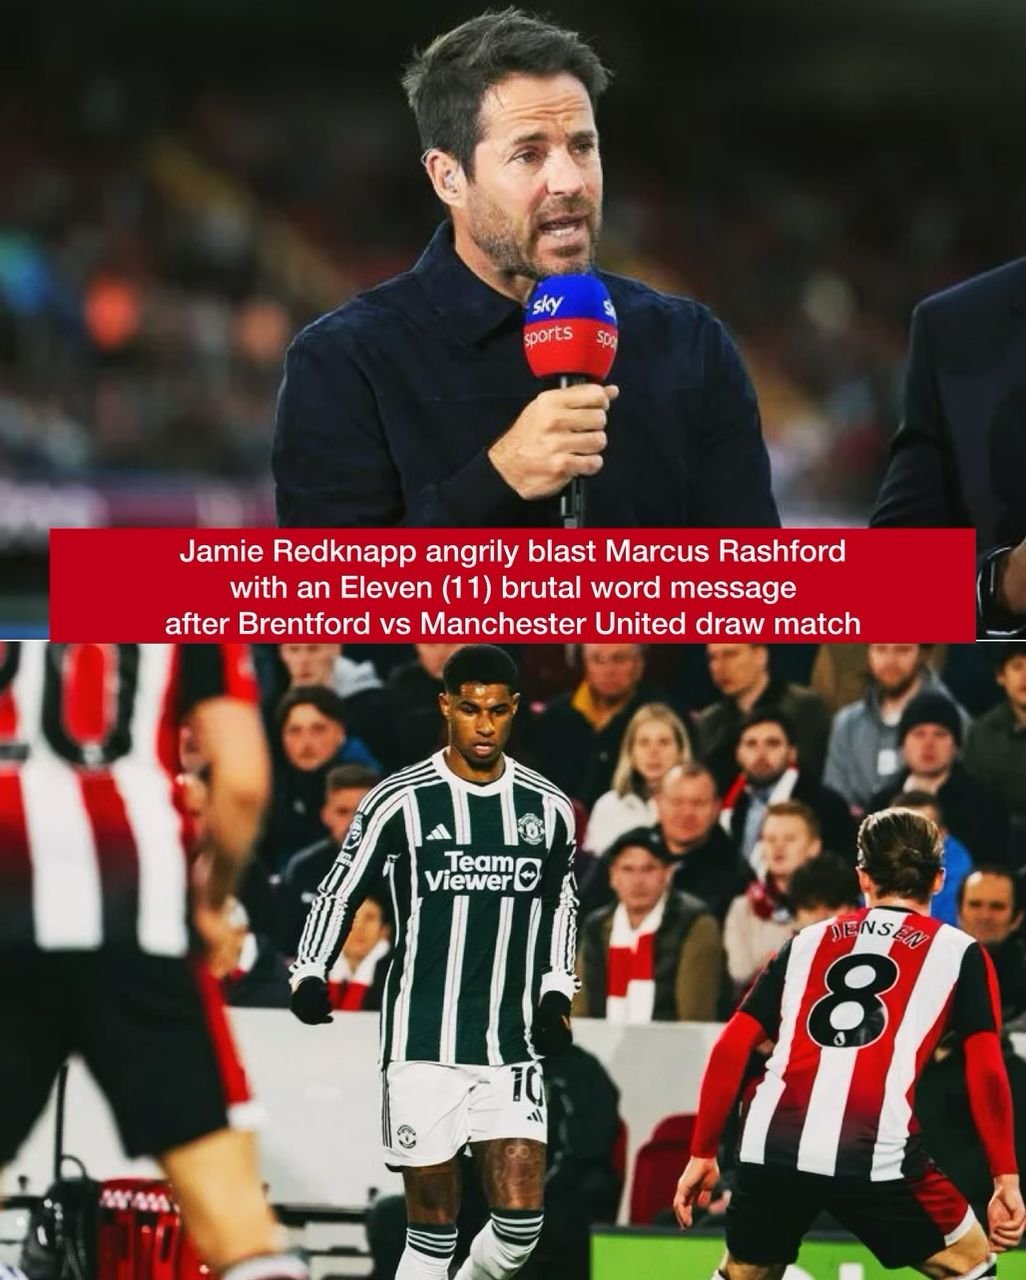 "After Brentford FC fired in 14 shots" - 50-year-old football legend Jamie Redknapp angrily blast Marcus Rashford with an Eleven (11) brutal word message after Brentford vs Manchester United draw match